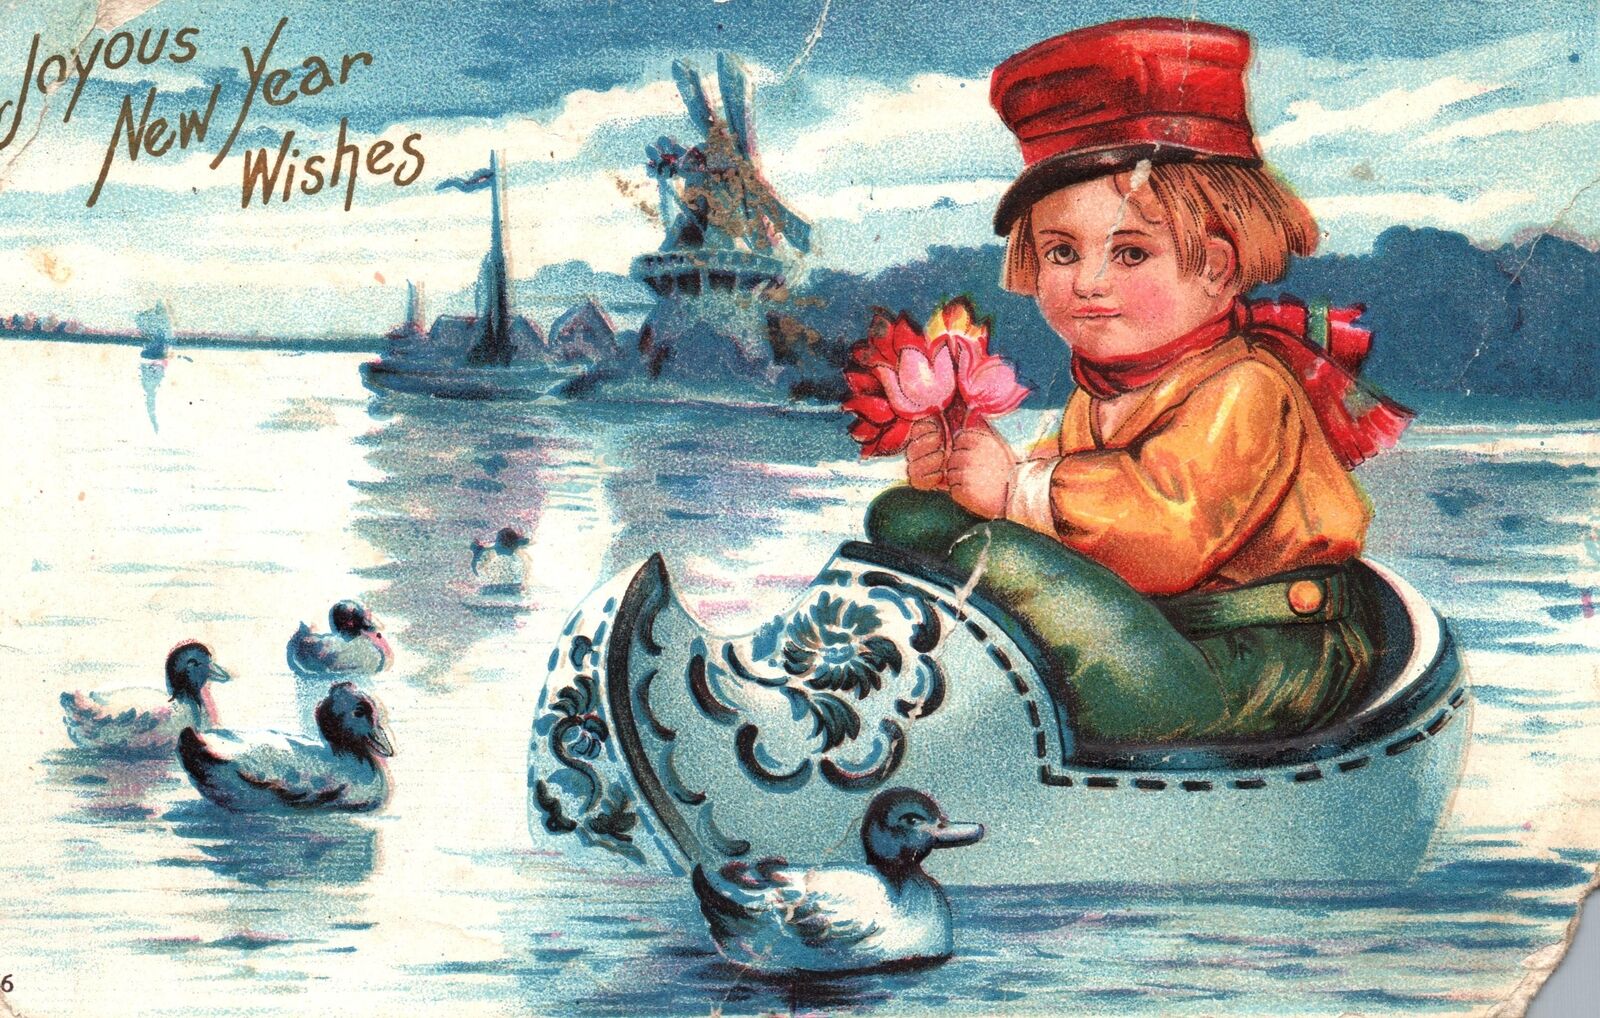 VINTAGE POSTCARD JOYOUS NEW YEAR WISHES PRIVATE MAILING CARD 1898-1901 MAILED 06